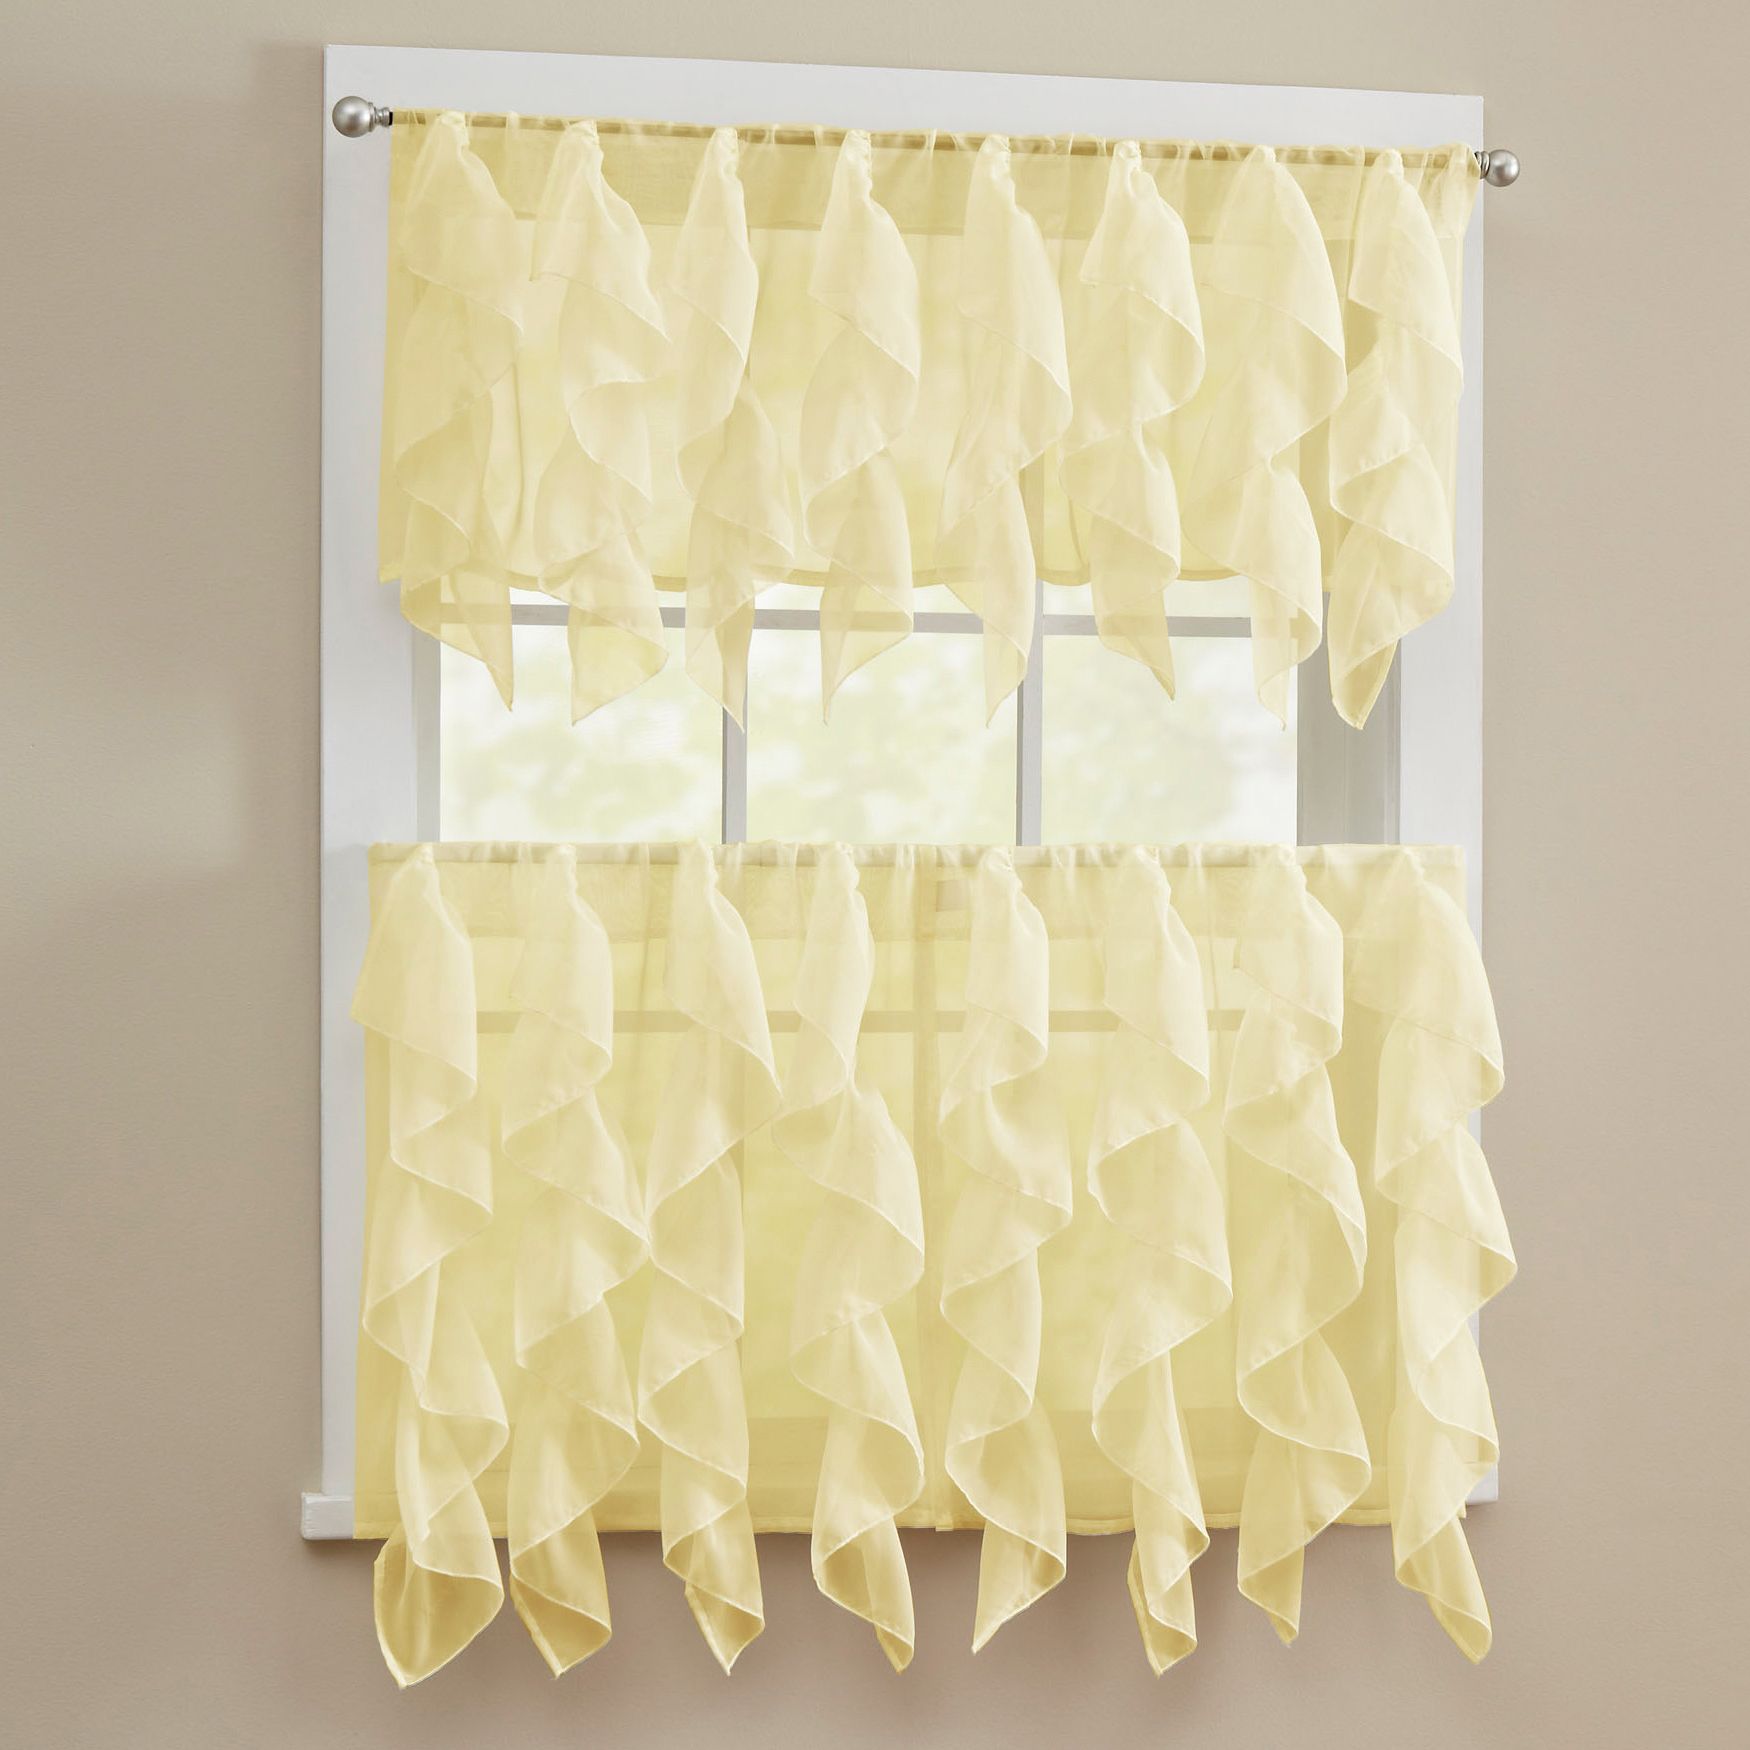 Details About Sheer Voile Vertical Ruffle Window Kitchen Curtain Tiers Or  Valance Maize In Pleated Curtain Tiers (View 20 of 20)